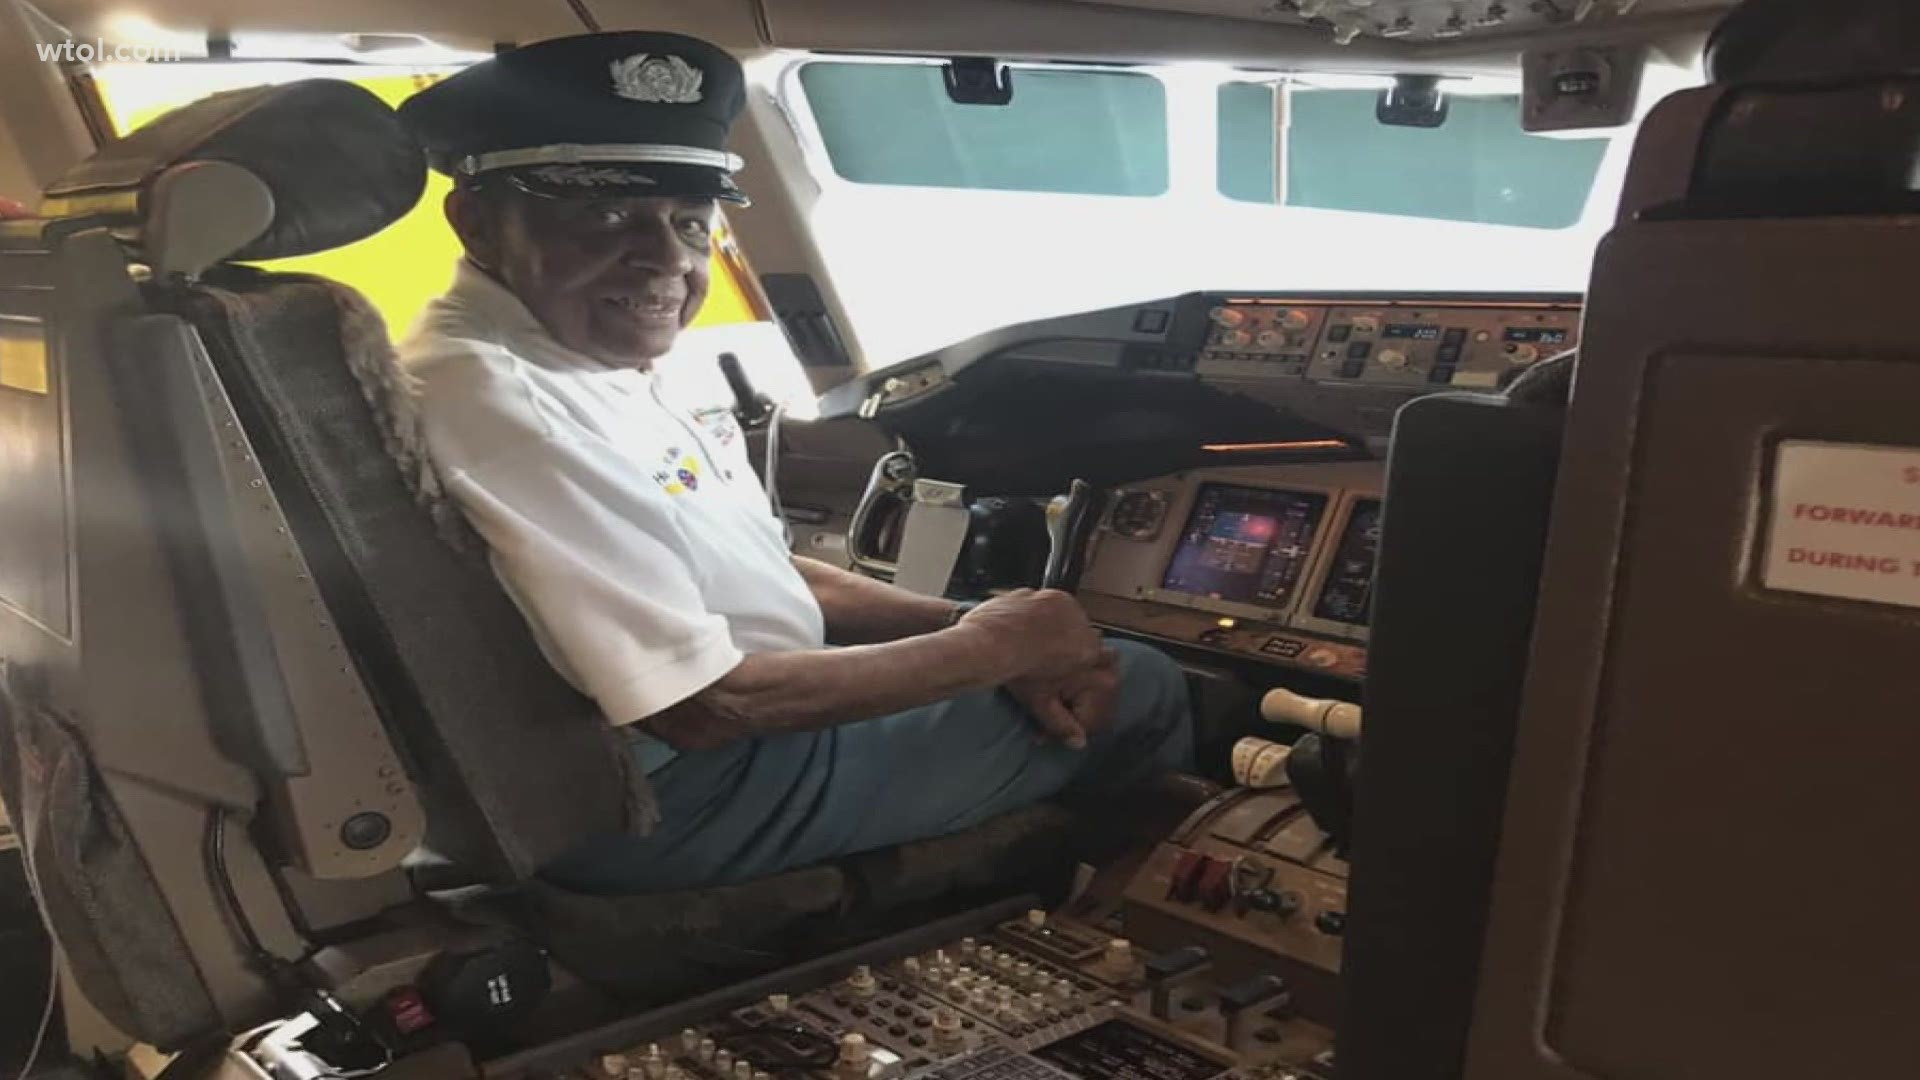 Tuskegee Airman Harold Brown said 'Why in the world would you take the risk of losing your life when you can take a shot that takes no more than a few seconds?'